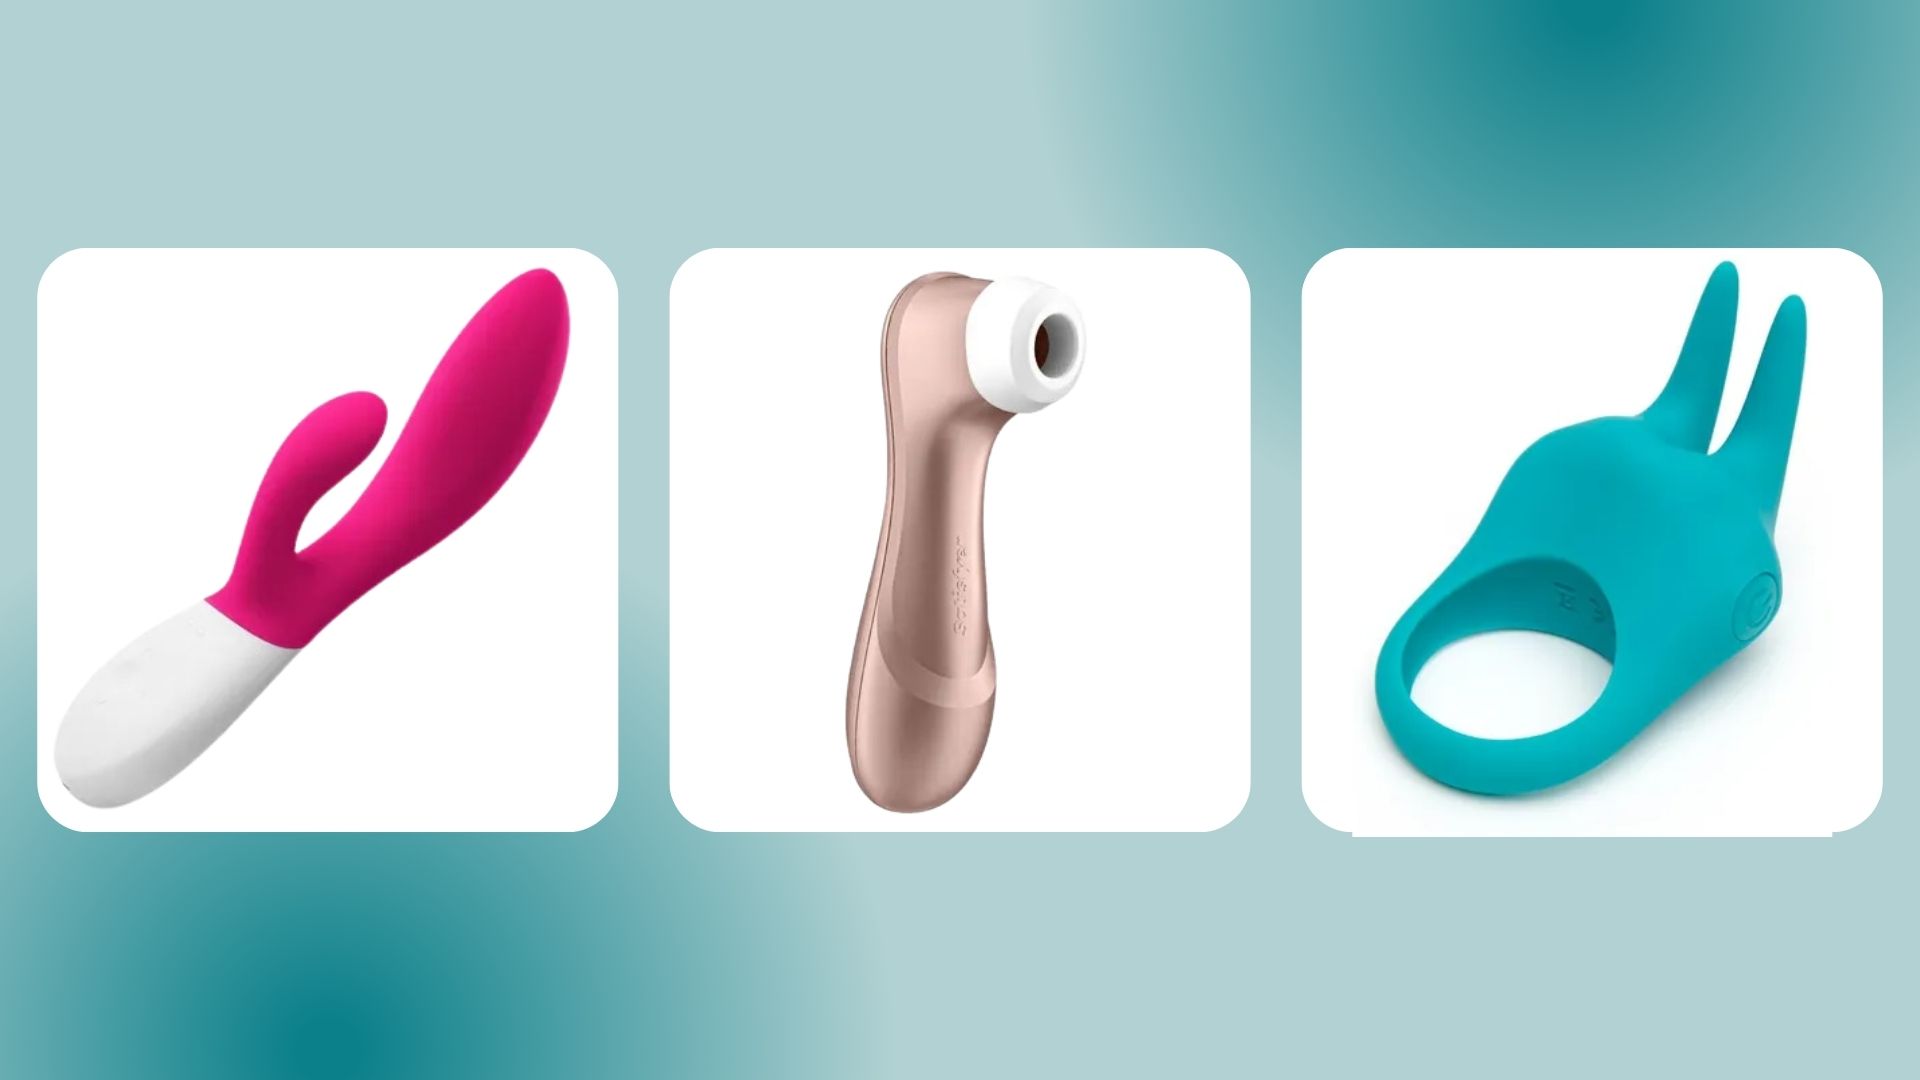 Discover the Pleasures of Intimacy with our Collection of Vibrators, Dildos, and More from atoz-gadgets.com